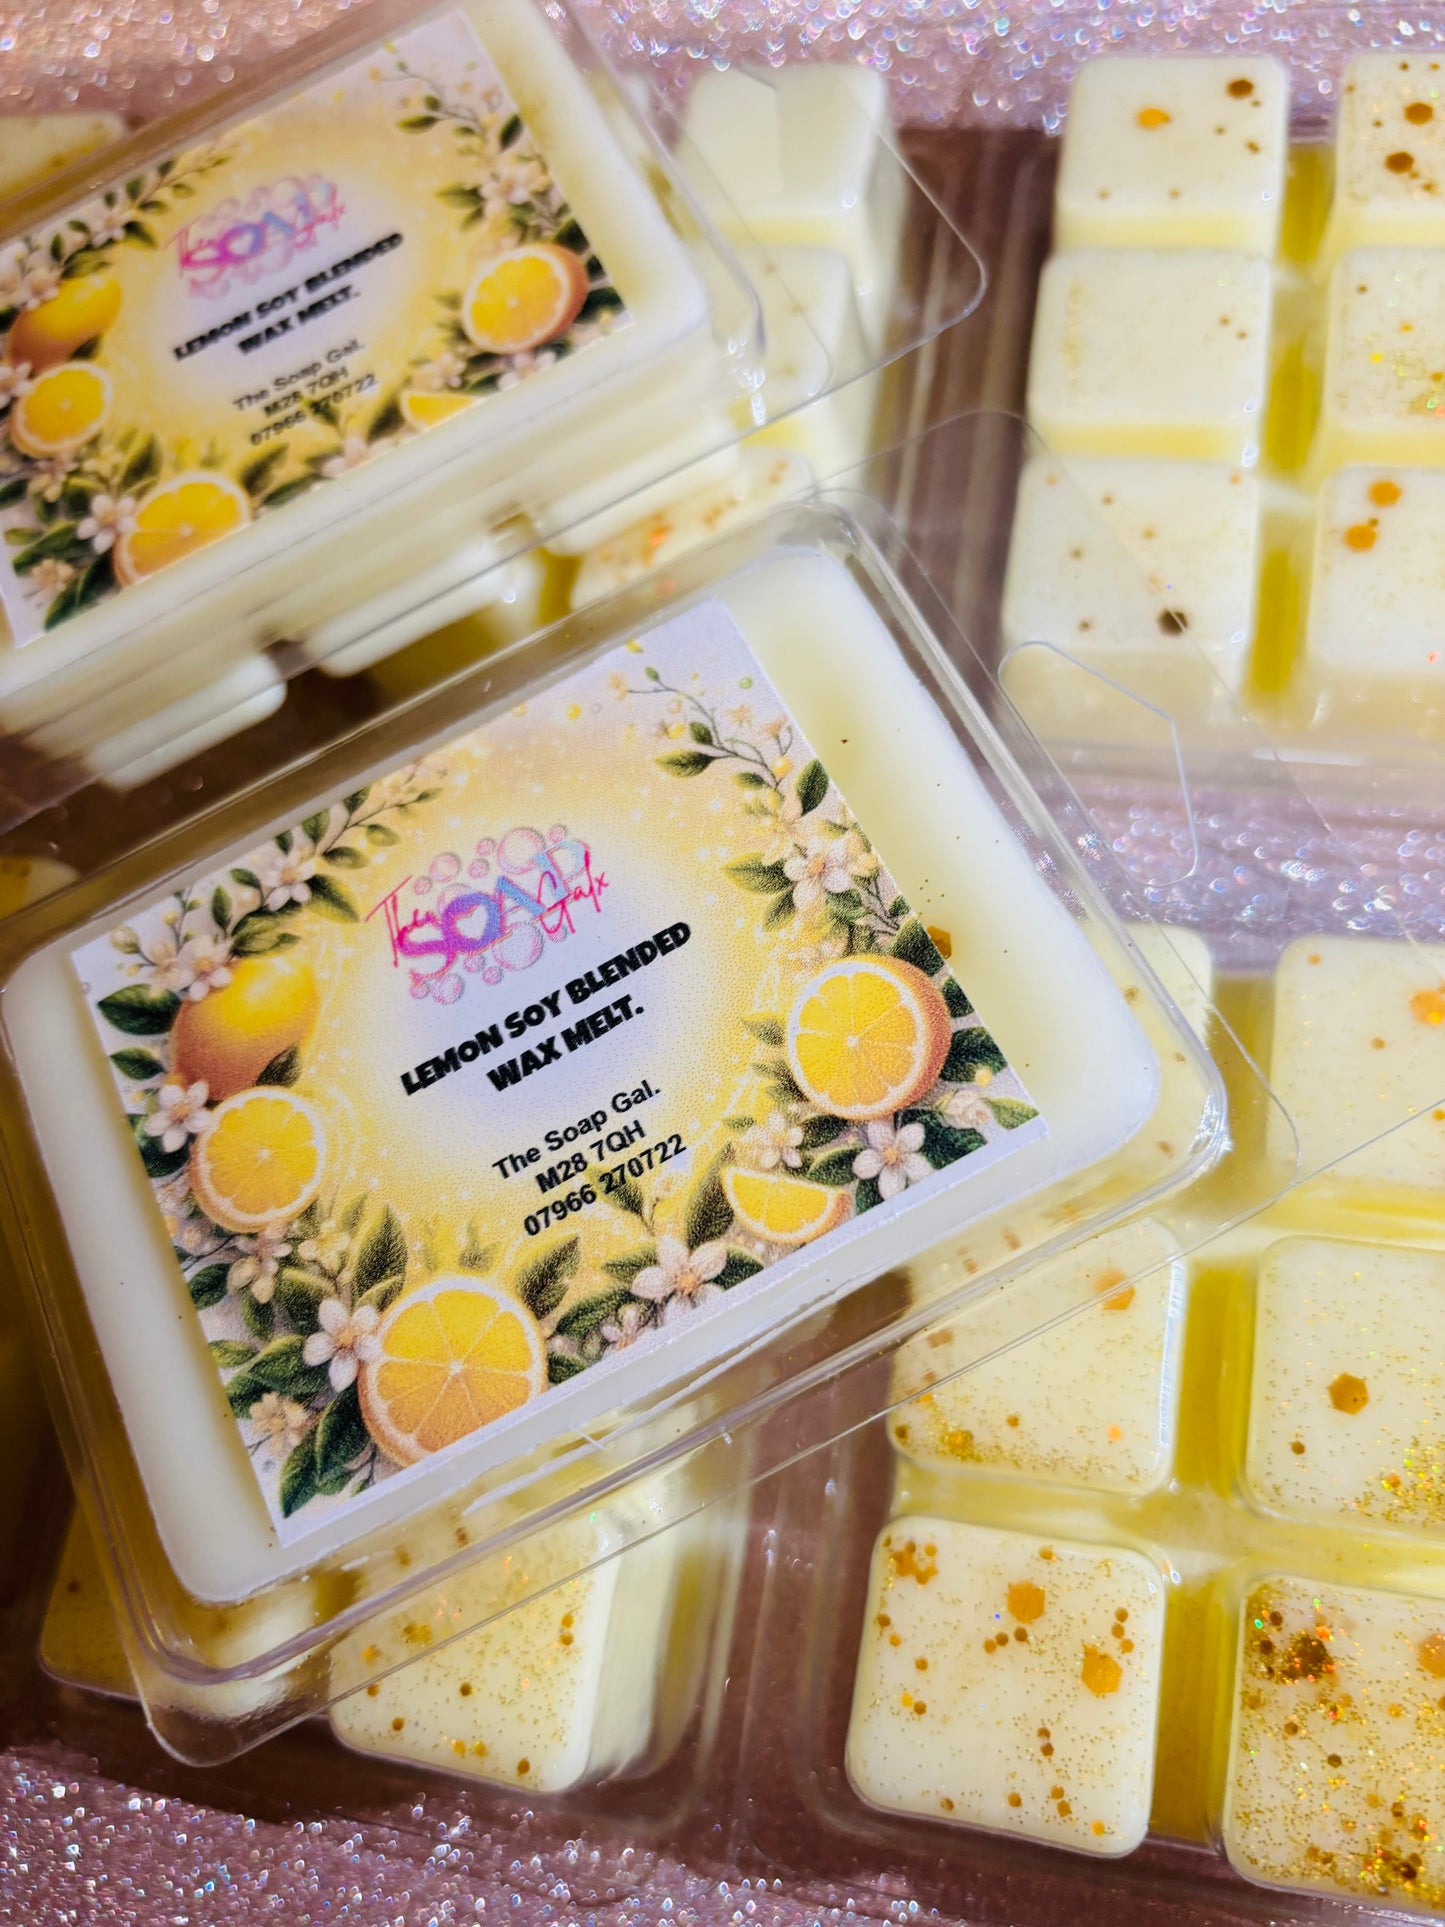 Packaged Lemon and Meringue Pie Wax Melts by The Soap Gal x displayed on a sparkly pink background, some melts are visible outside the container, showcasing yellow color with speckles.